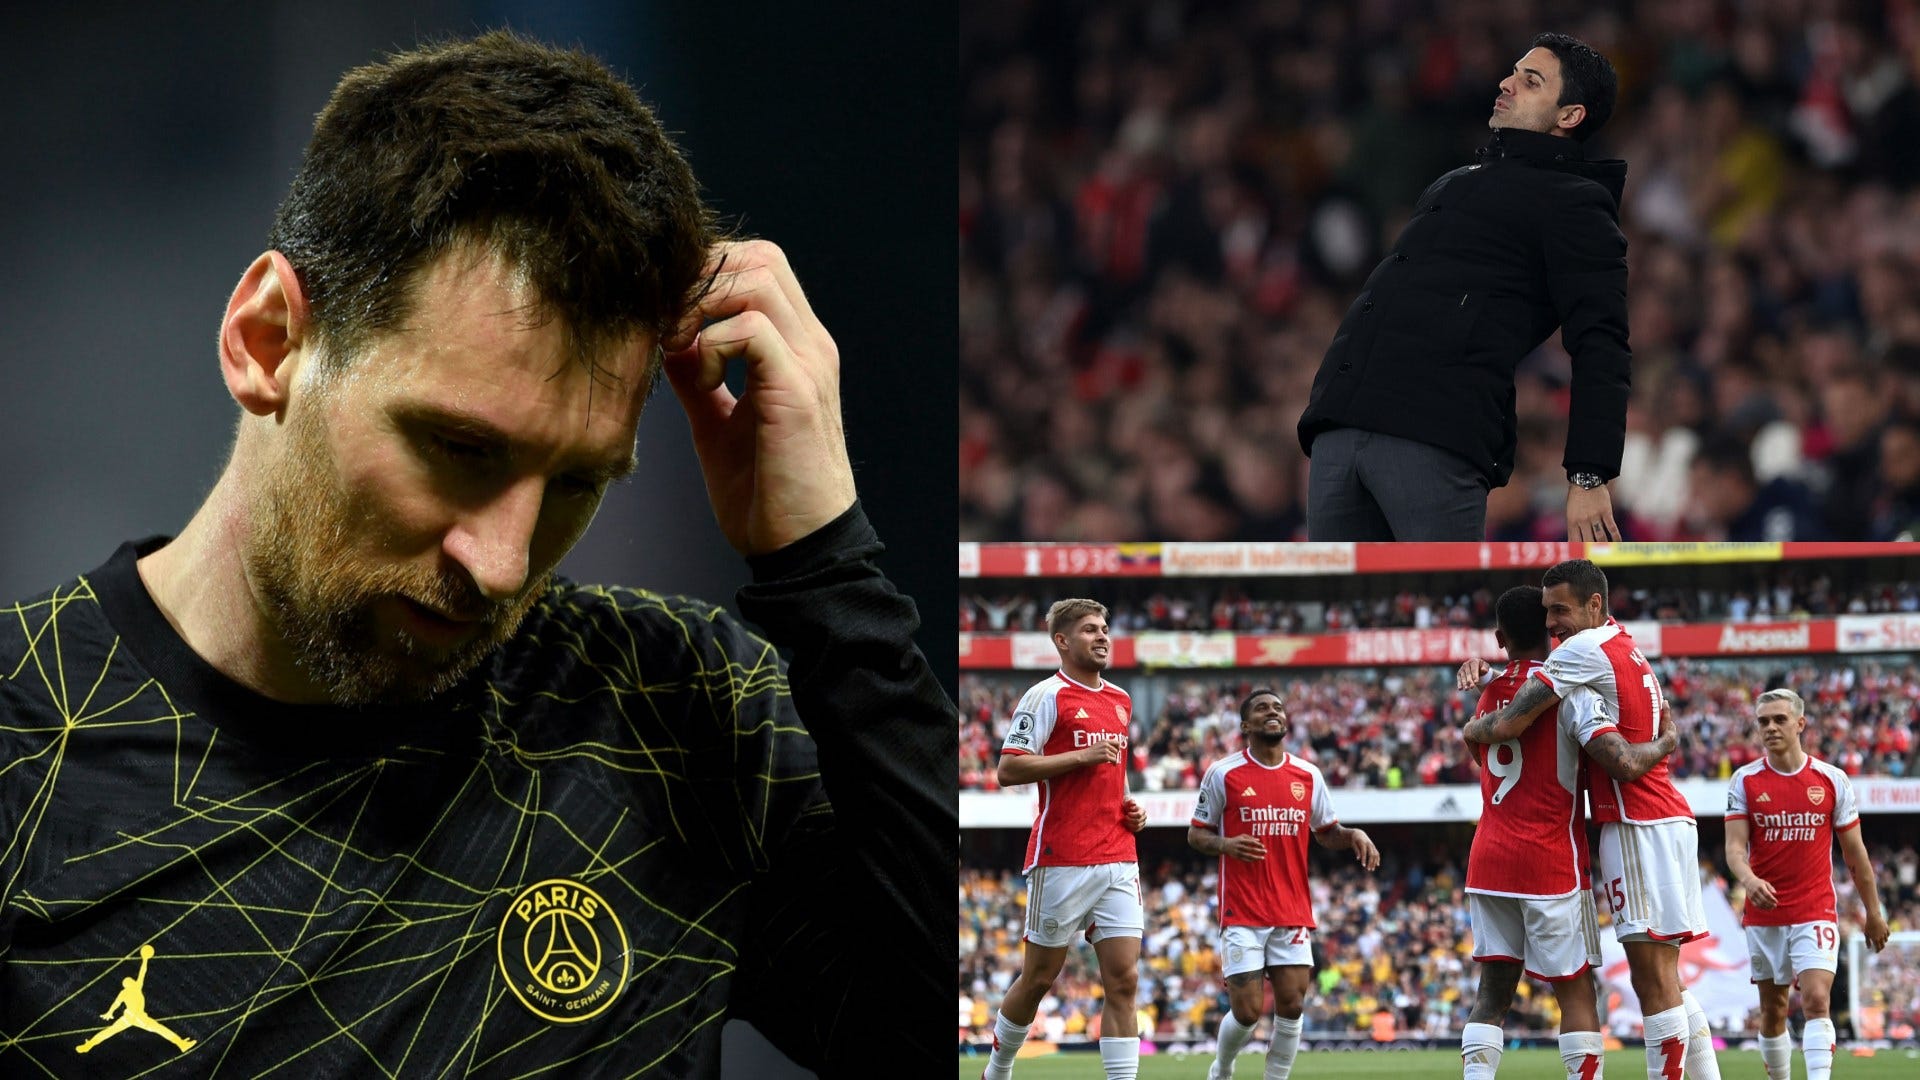 Lionel Messi not good enough for Arsenal?! World Cup winner wouldn’t get into the Gunners team, says former striker Darren Bent